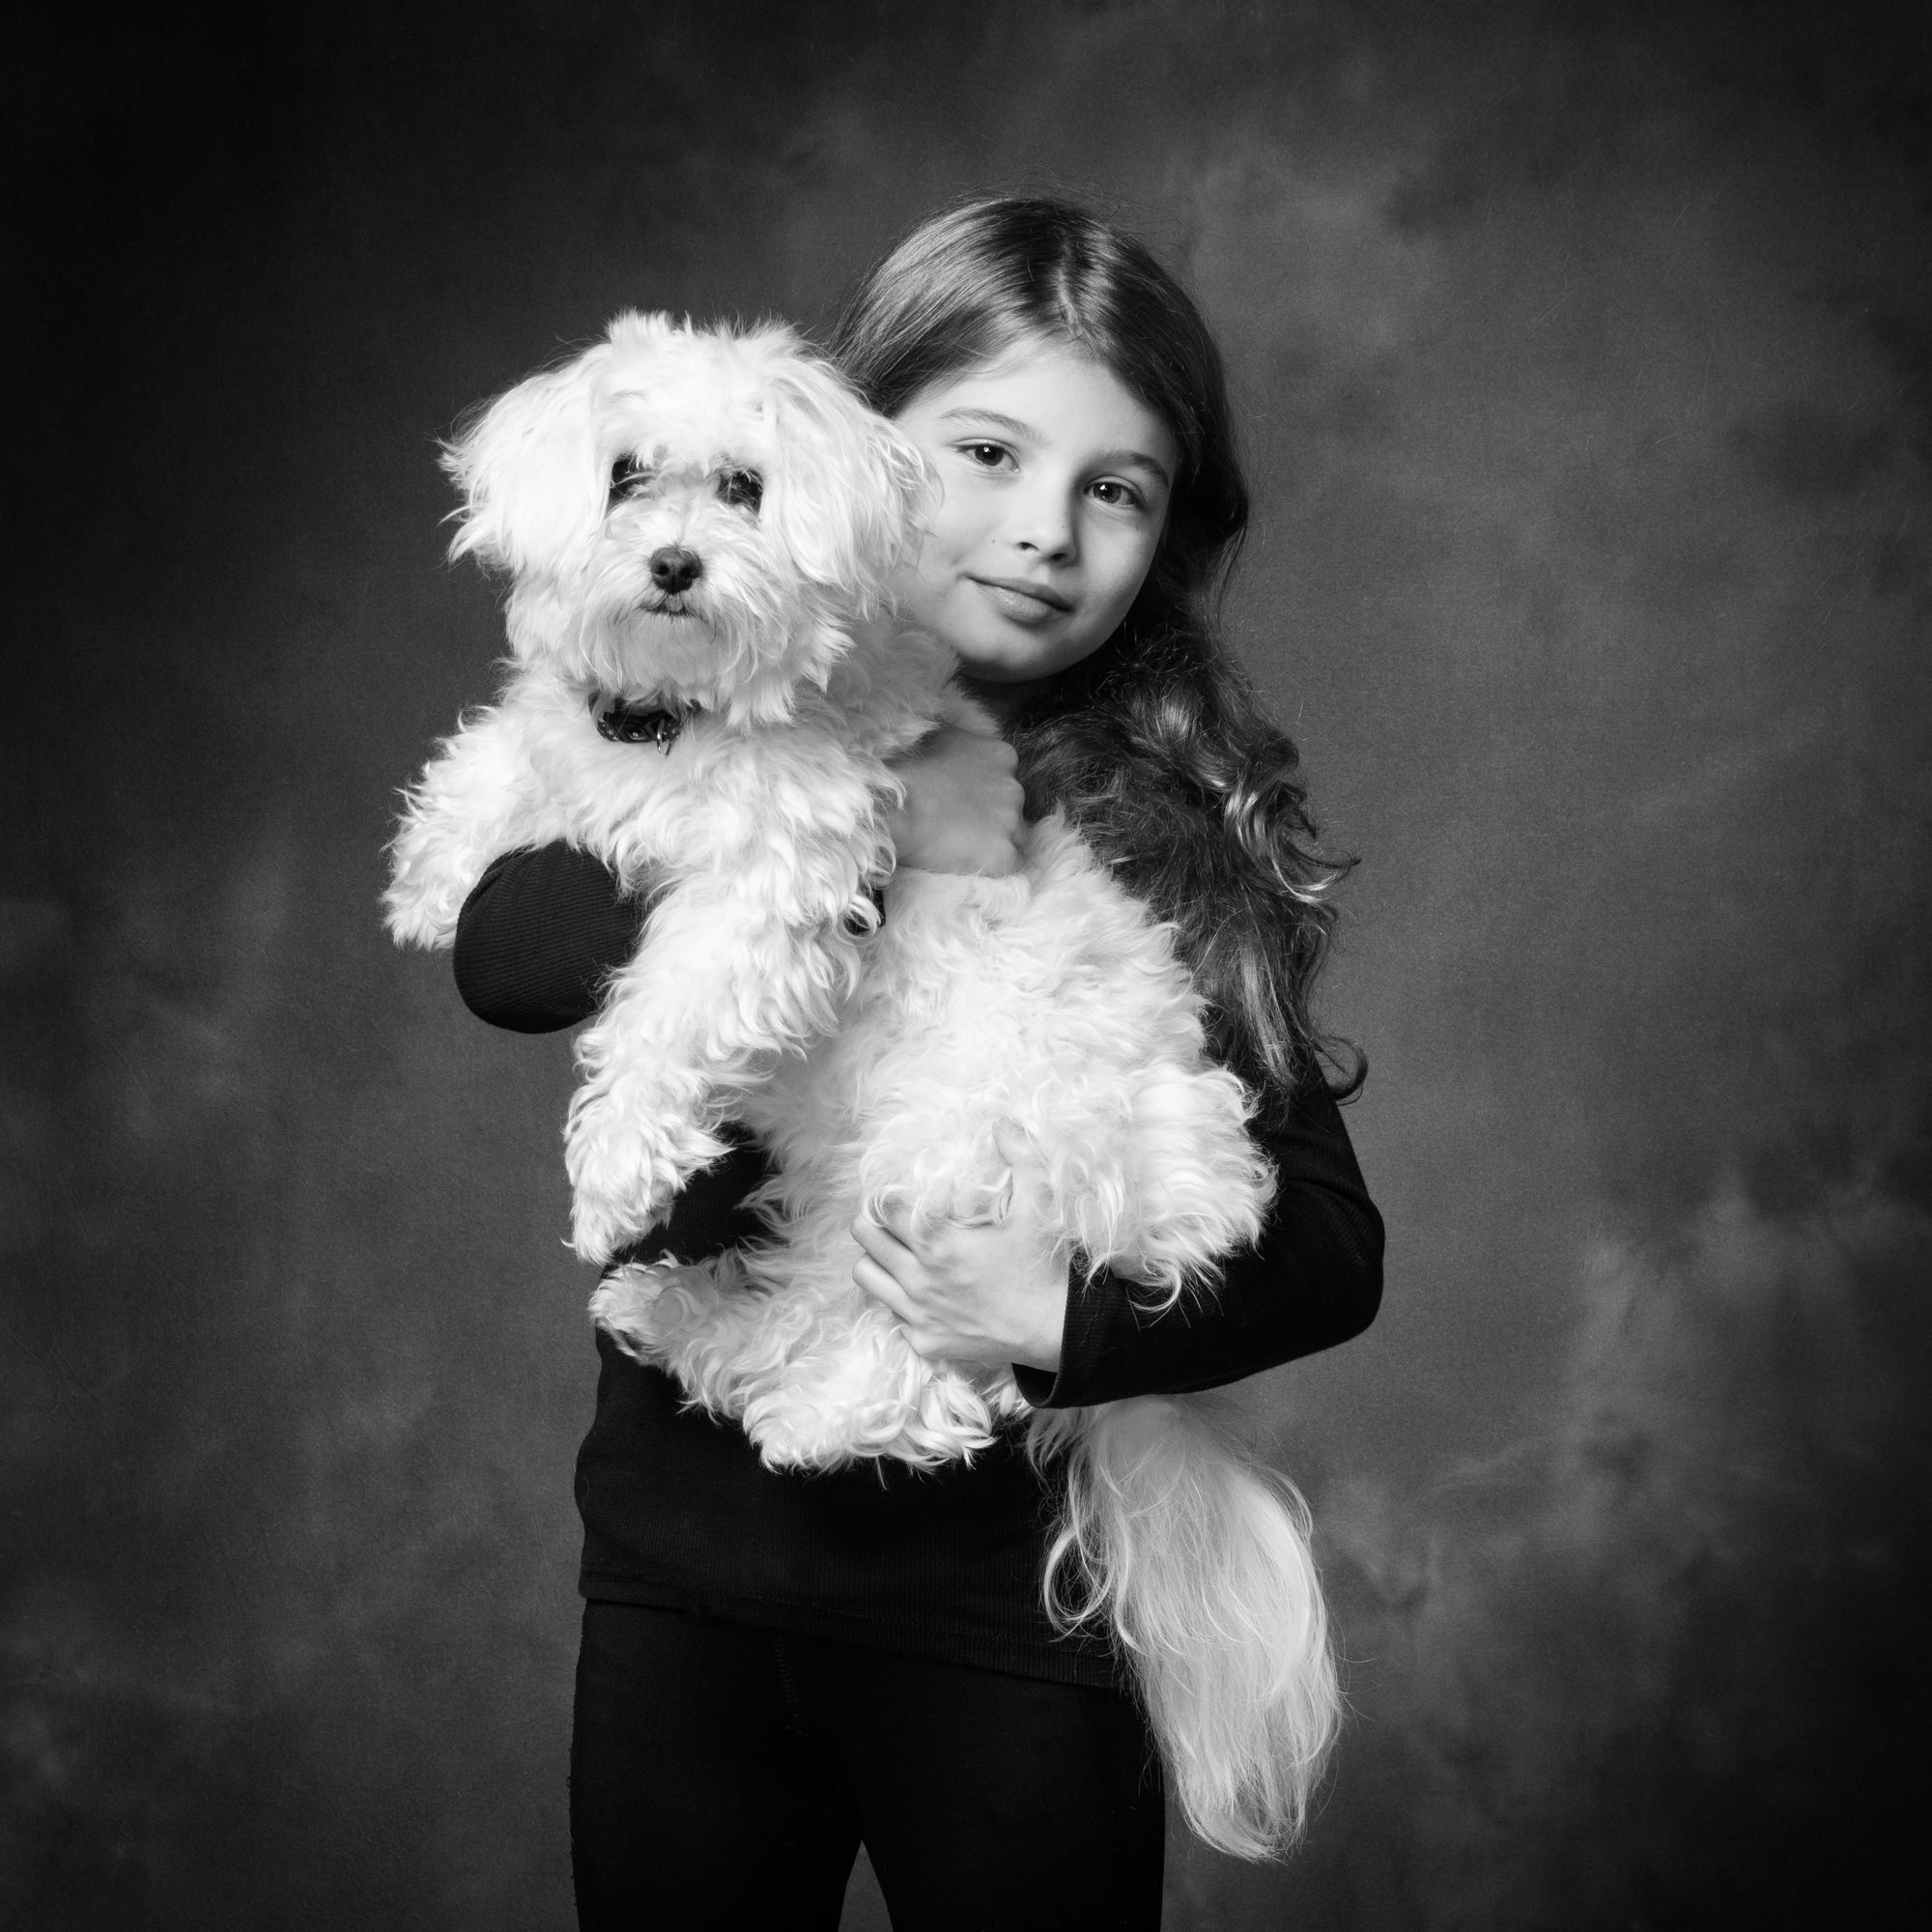 Portrait in black and white of a little girl and her small white dog